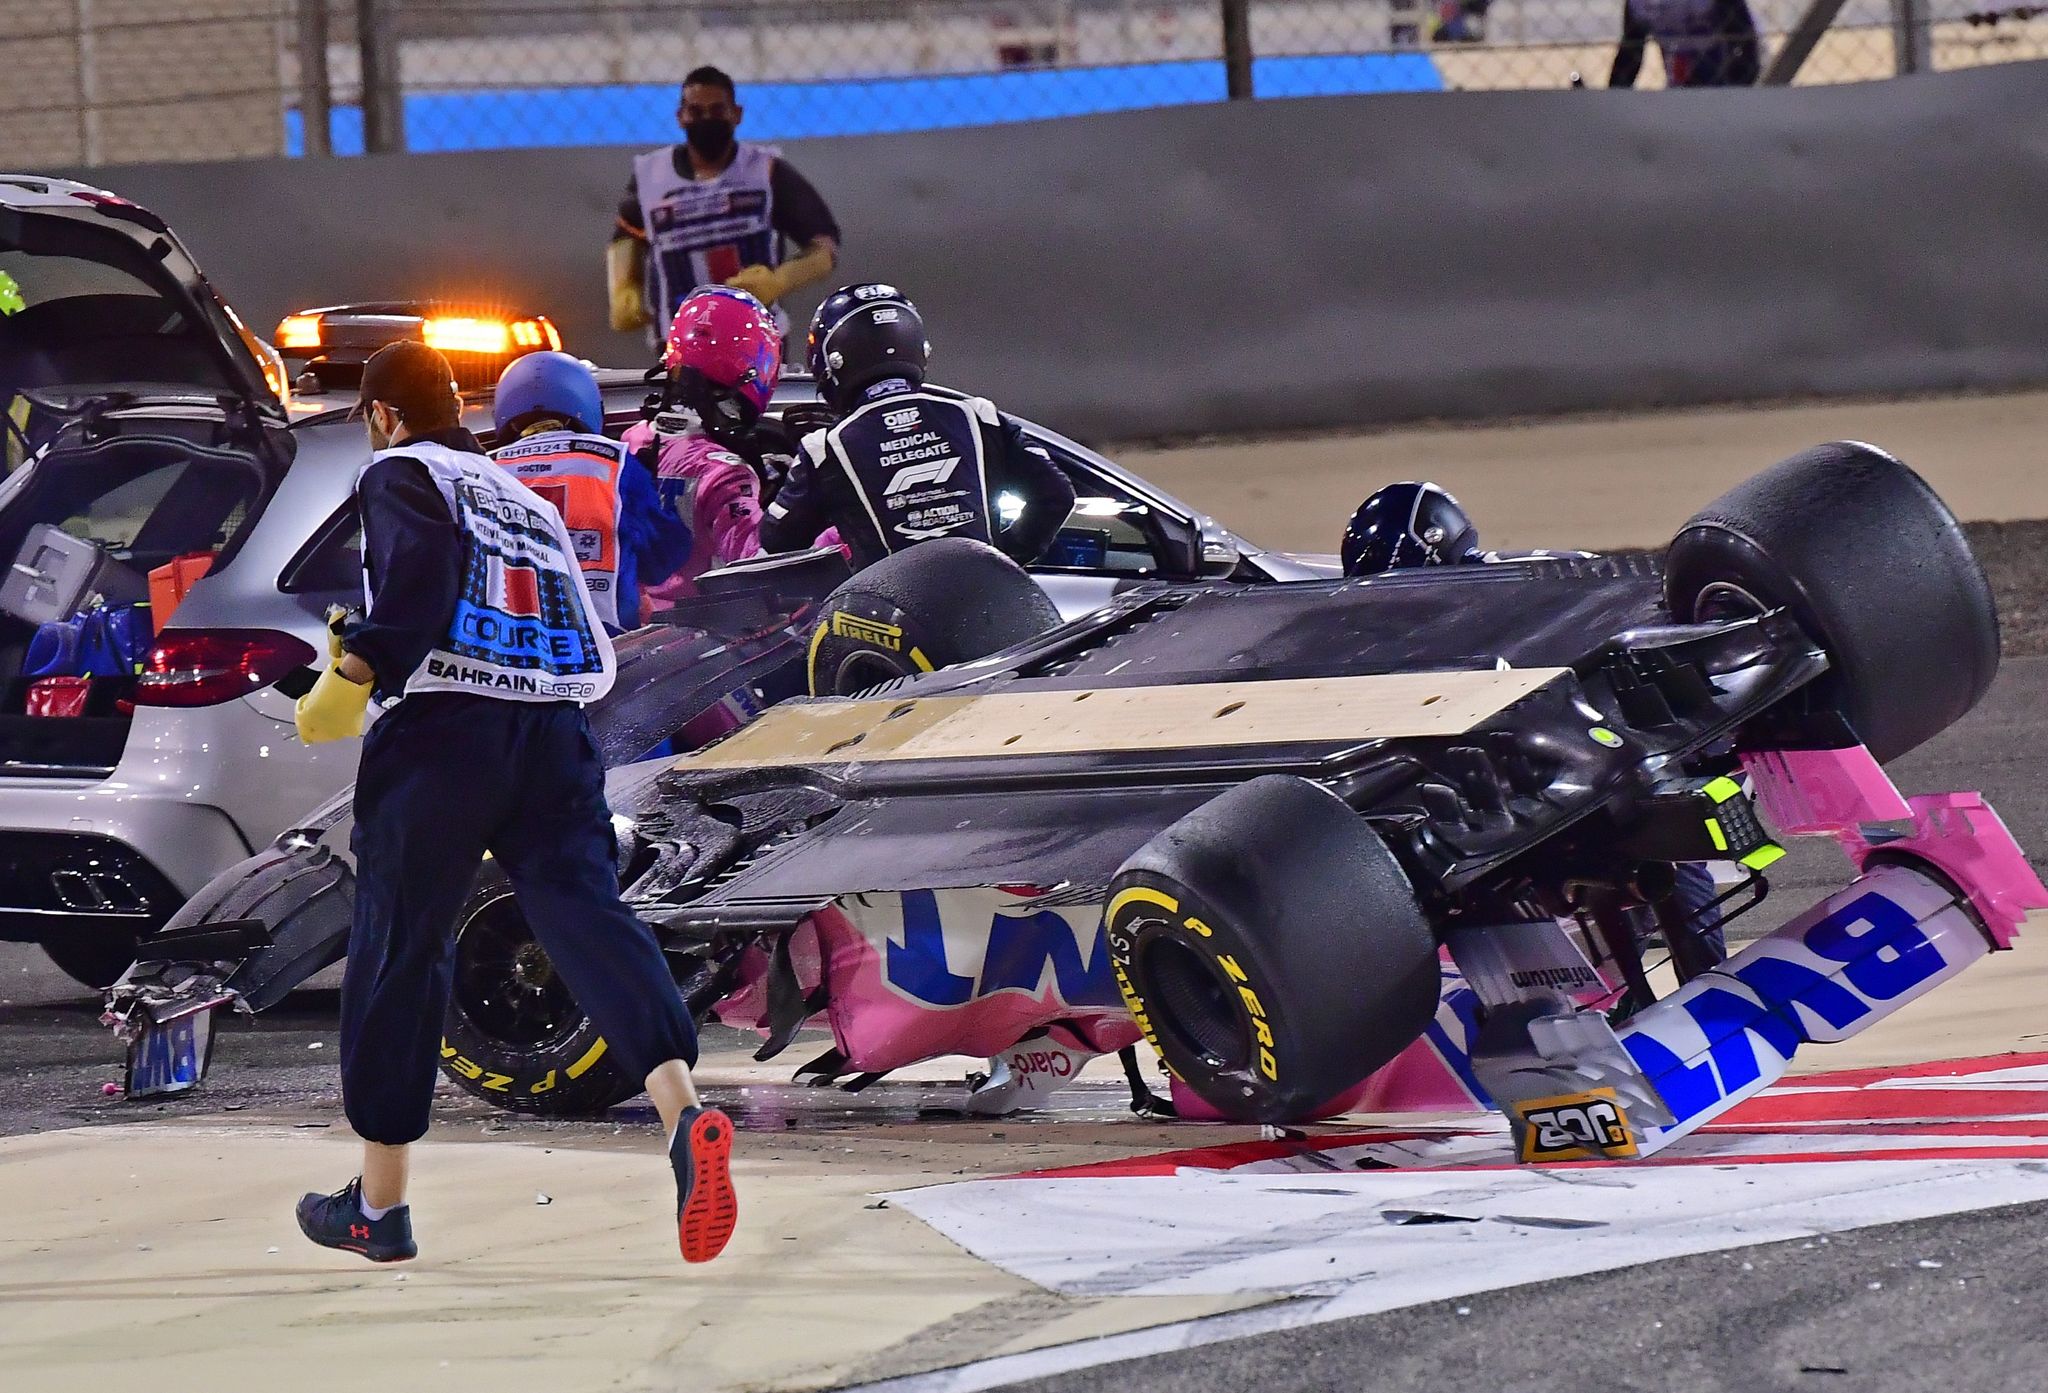 Racing Point's Canadian driver Lance lt;HIT gt;Stroll lt;/HIT gt; (2nd-R) is helped into the medical car after crashing during the Bahrain Formula One Grand Prix at the Bahrain International Circuit in the city of Sakhir on November 29, 2020. (Photo by Giuseppe CACACE / POOL / AFP)